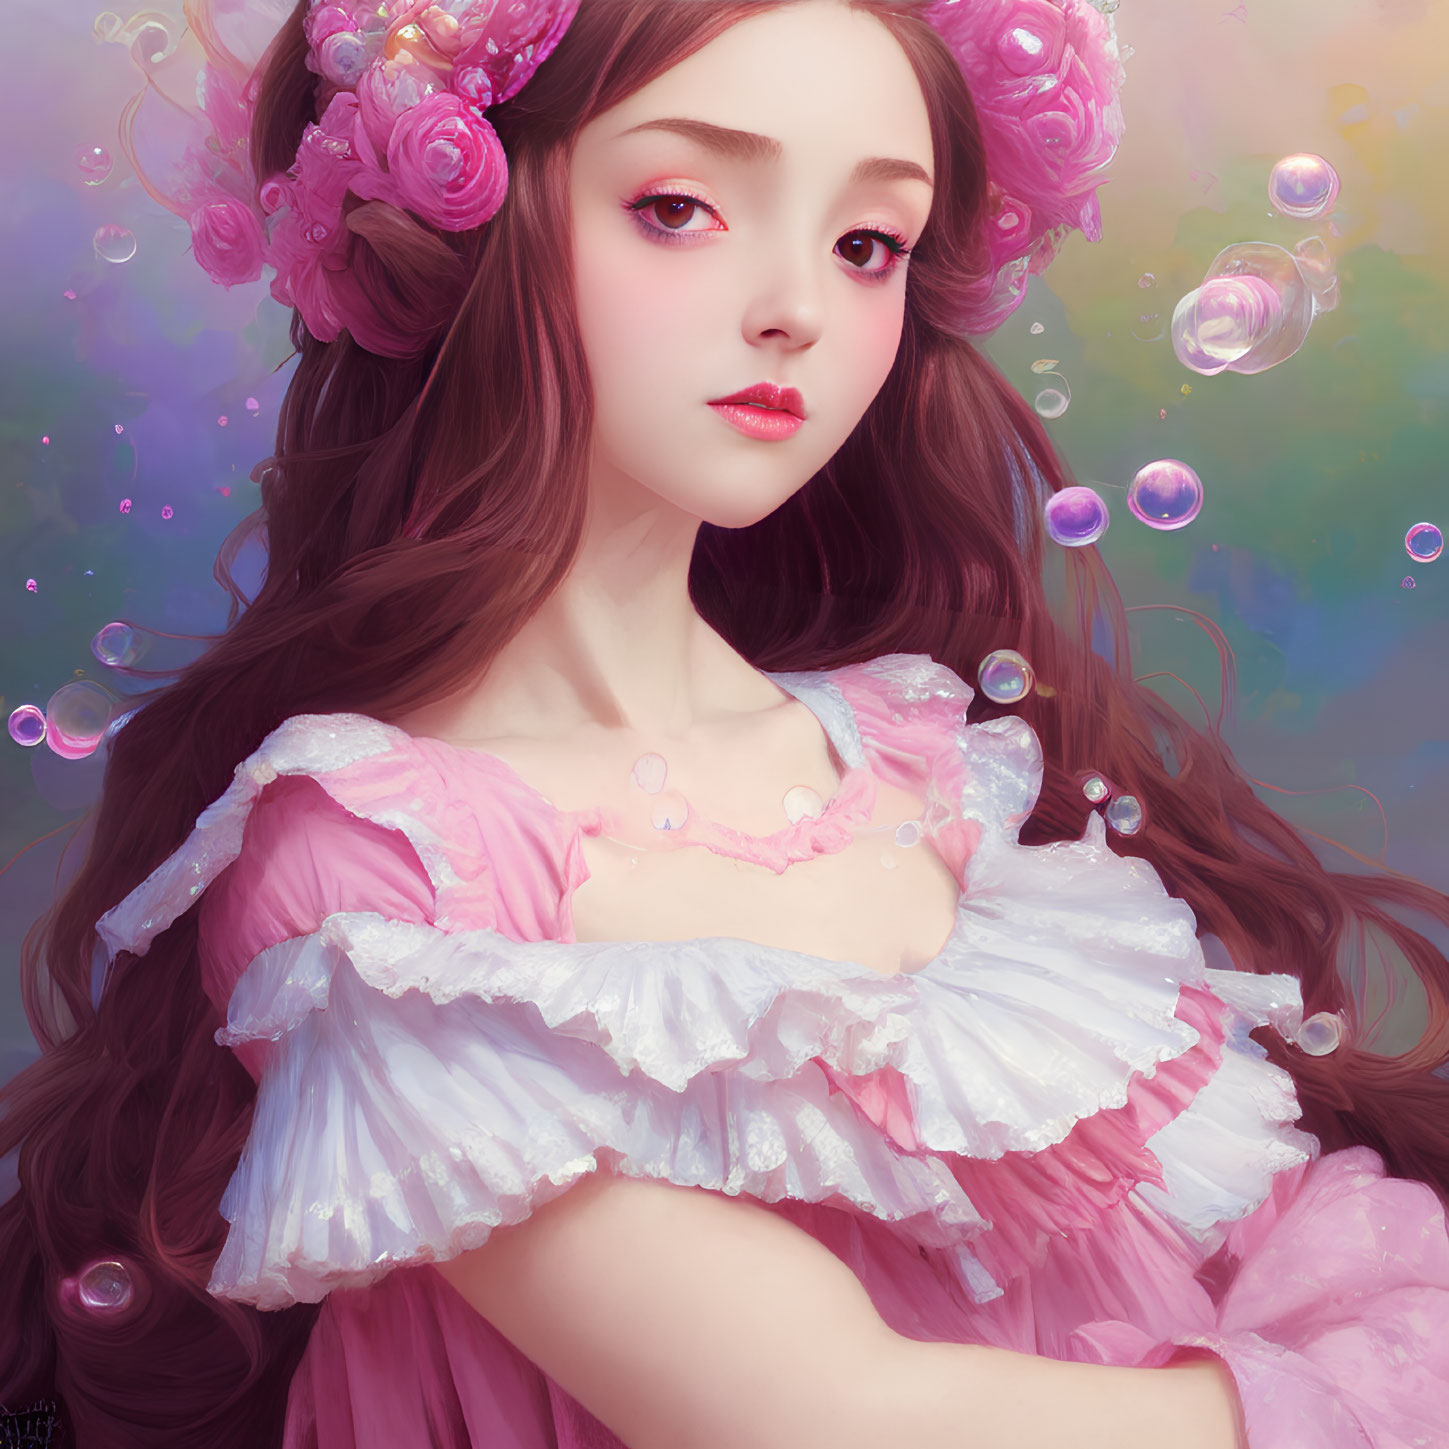 Young woman with dark hair and pink roses in pink dress among floating bubbles